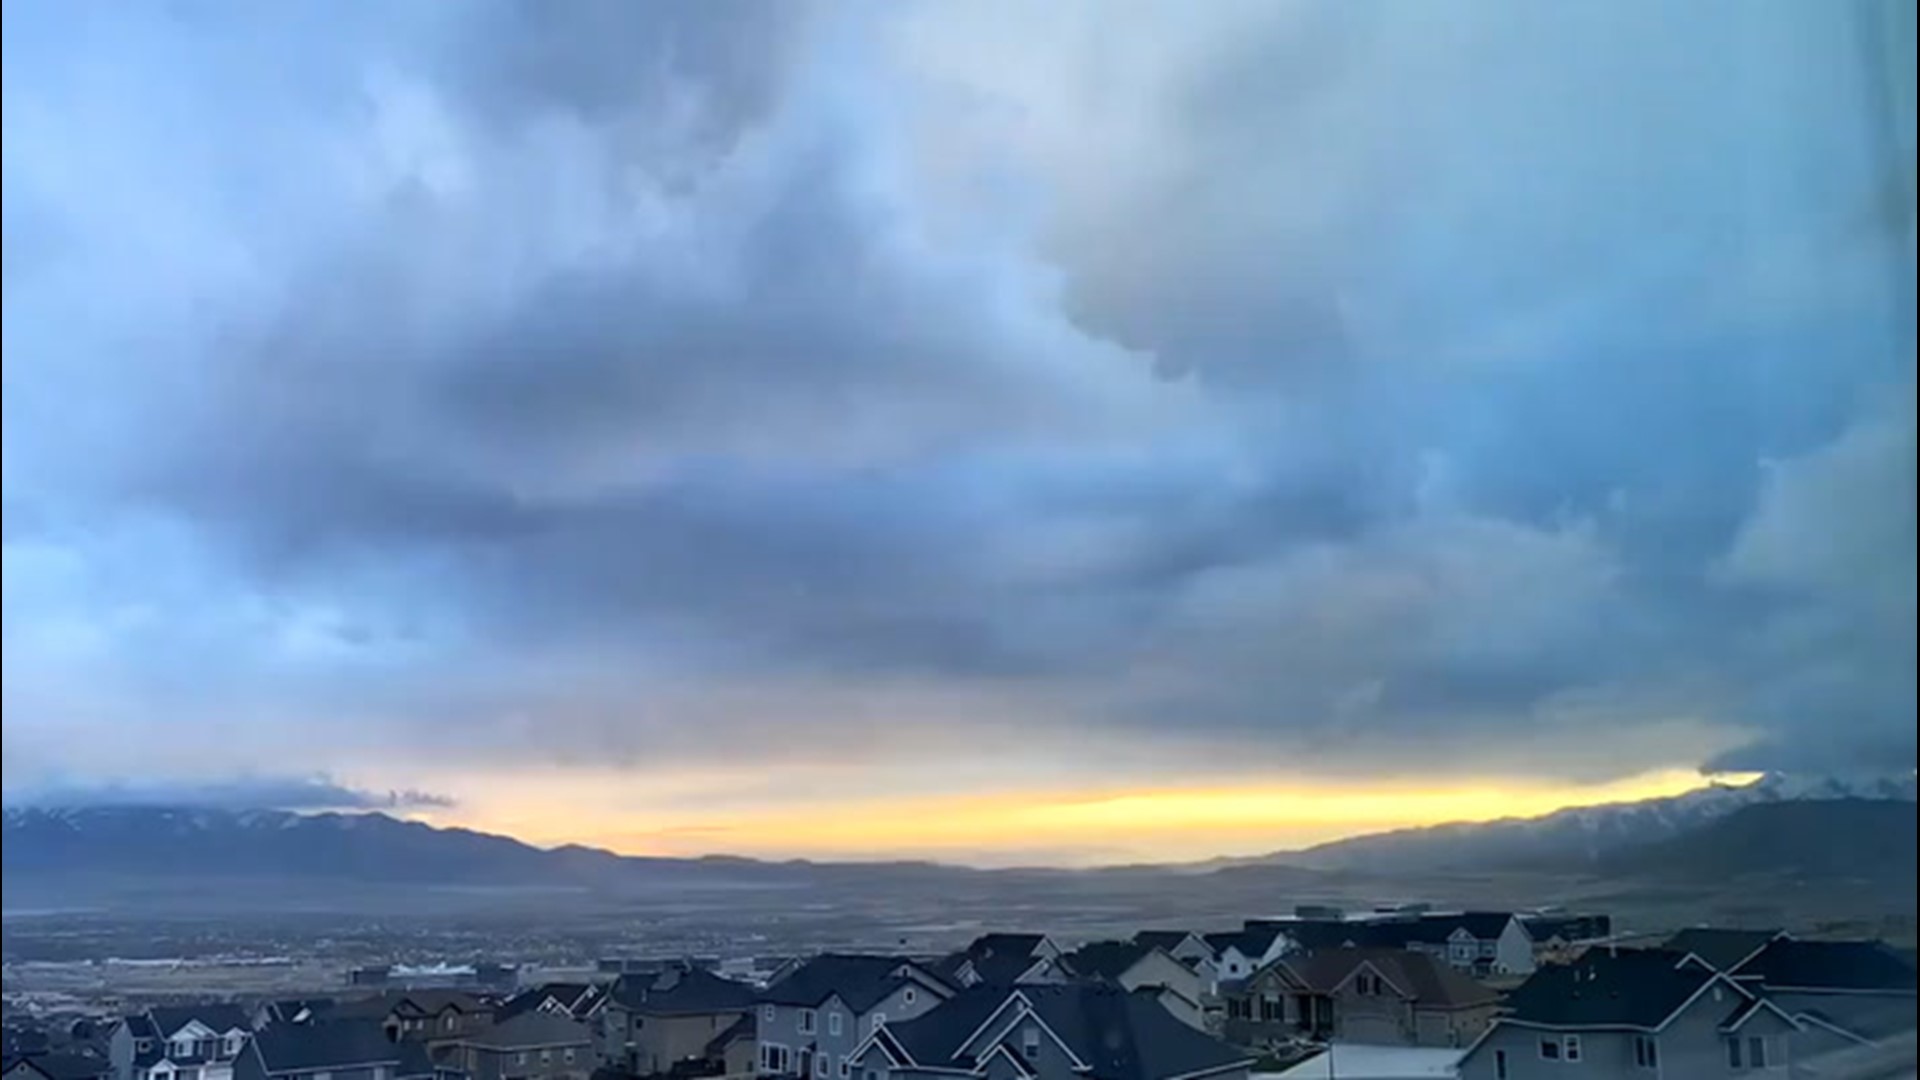 This time-lapse video was captured over Lehi, Utah, on April 1. The recorder said it was a very windy evening with peak gusts at 58 miles per hour.